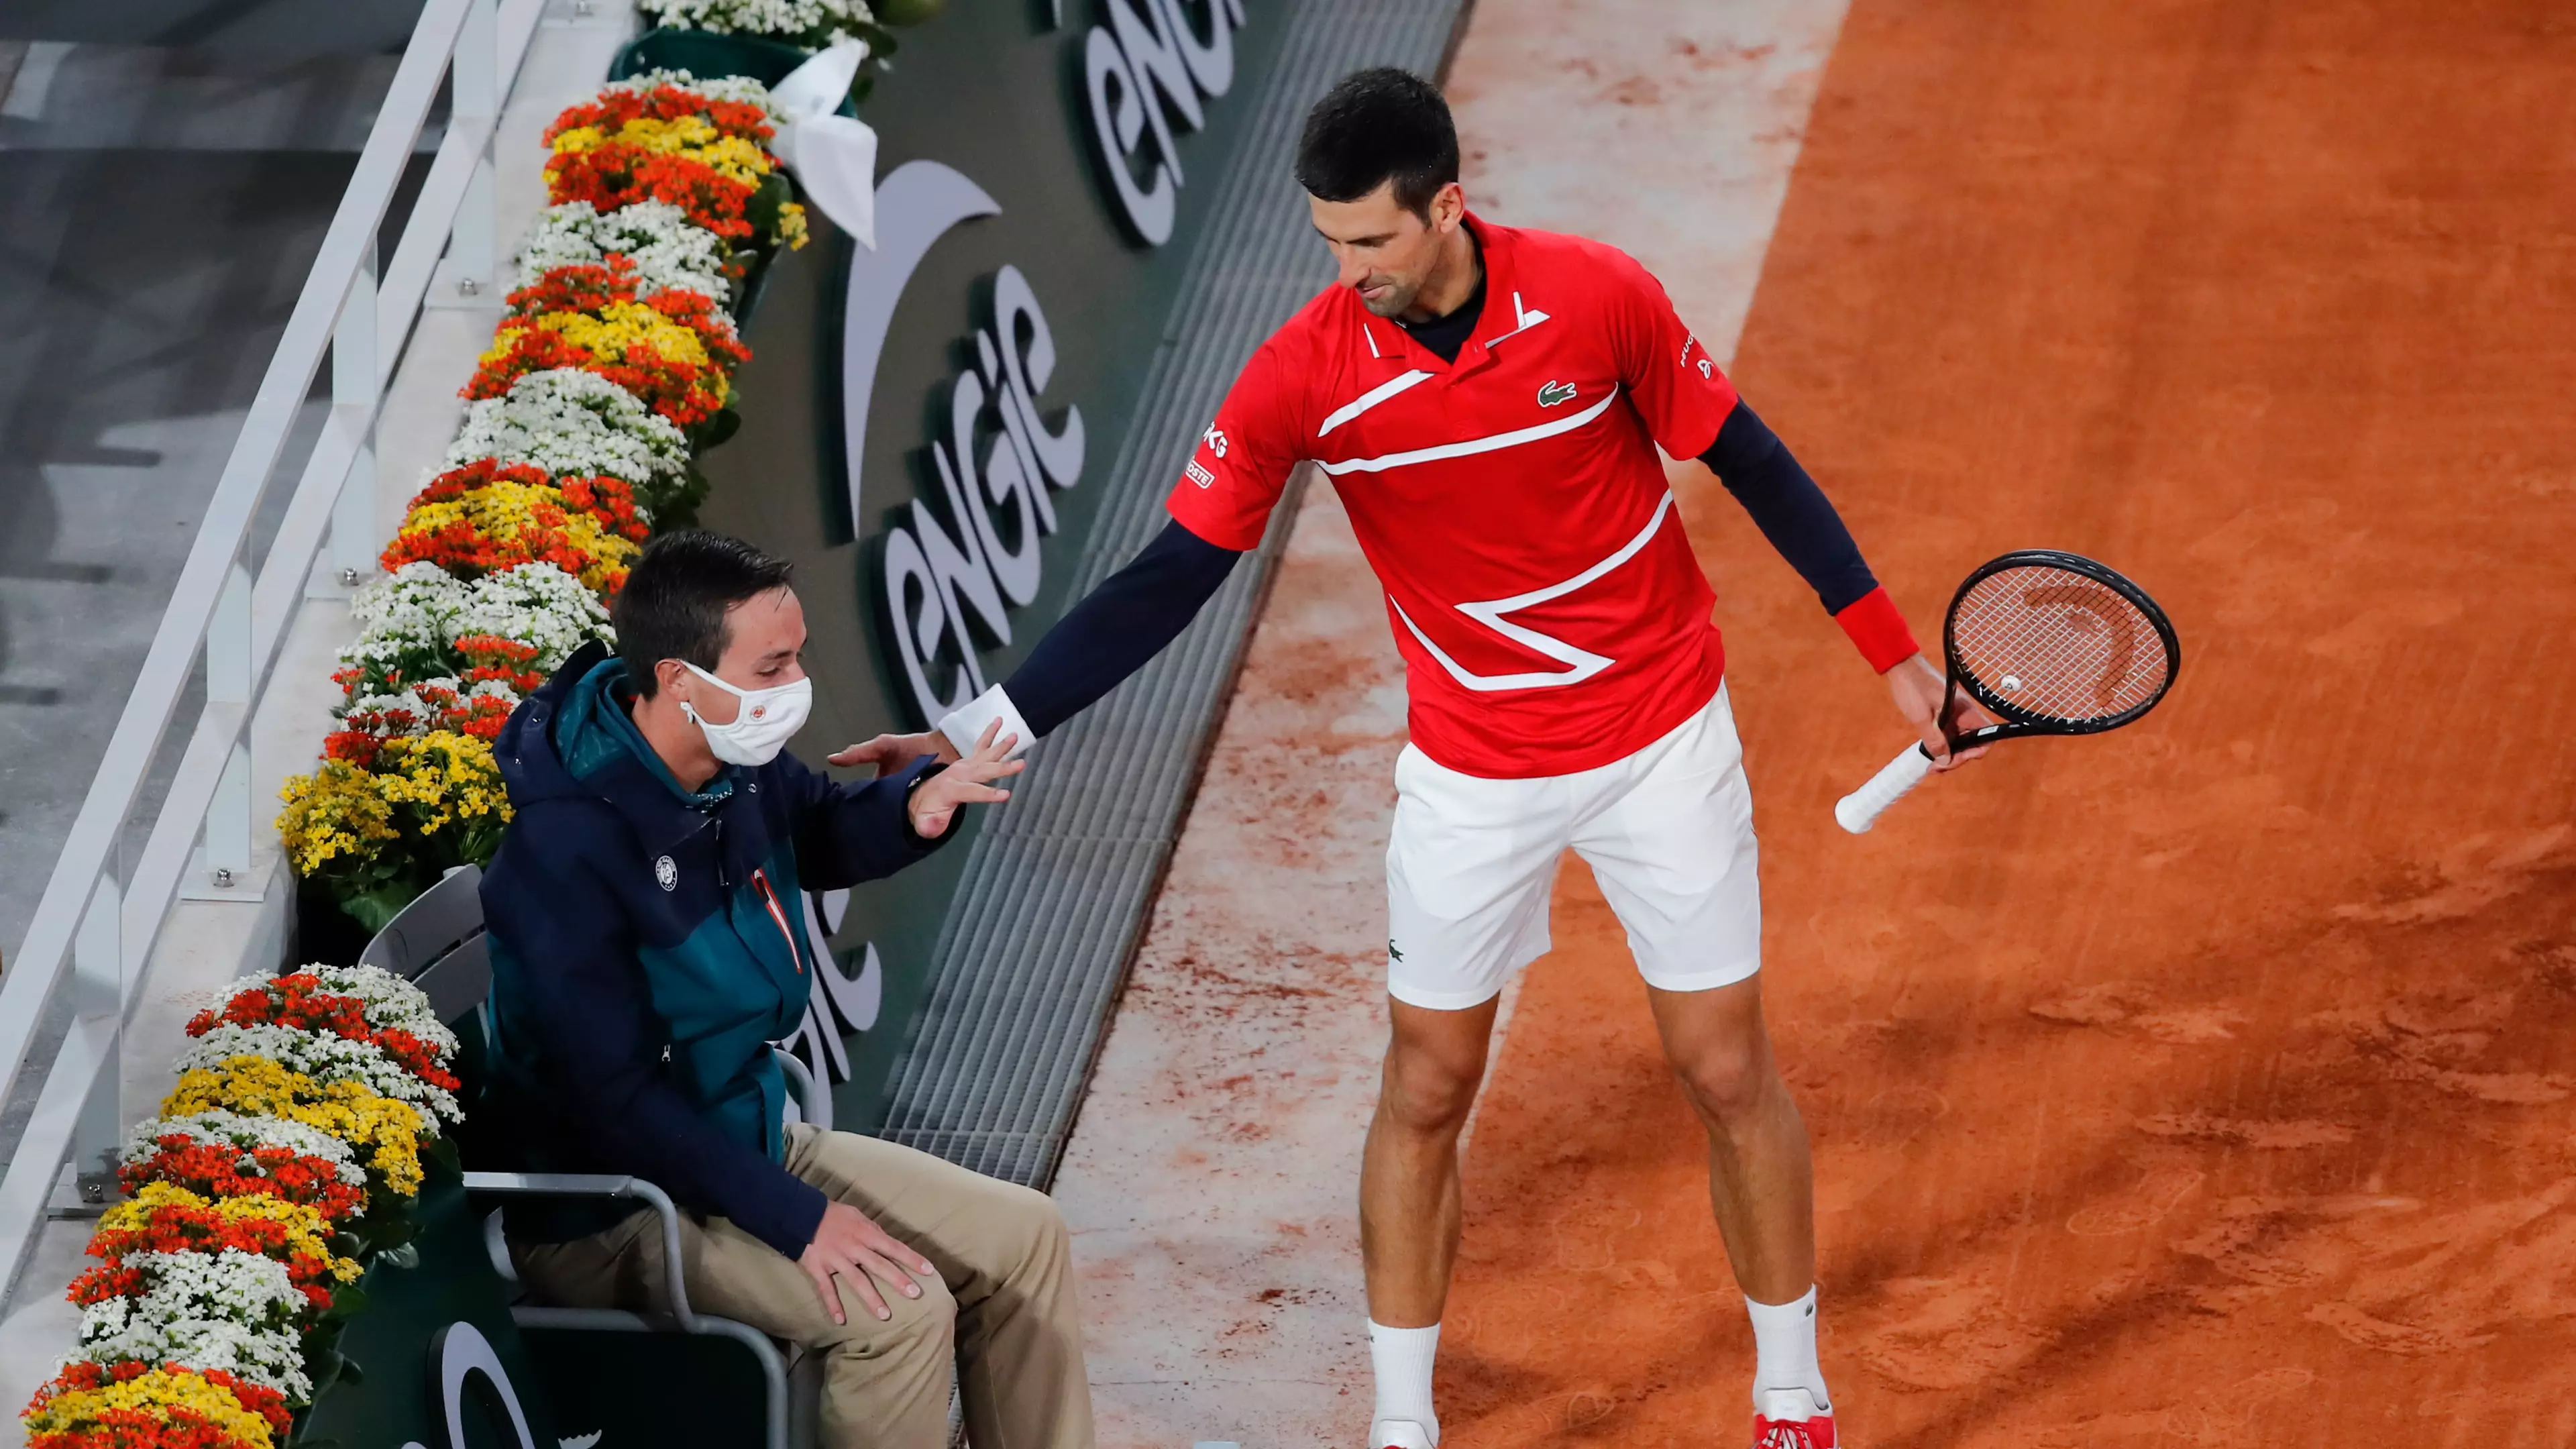  Novak Djokovic Hit A Line Judge In The Face With A Tennis Ball... Again